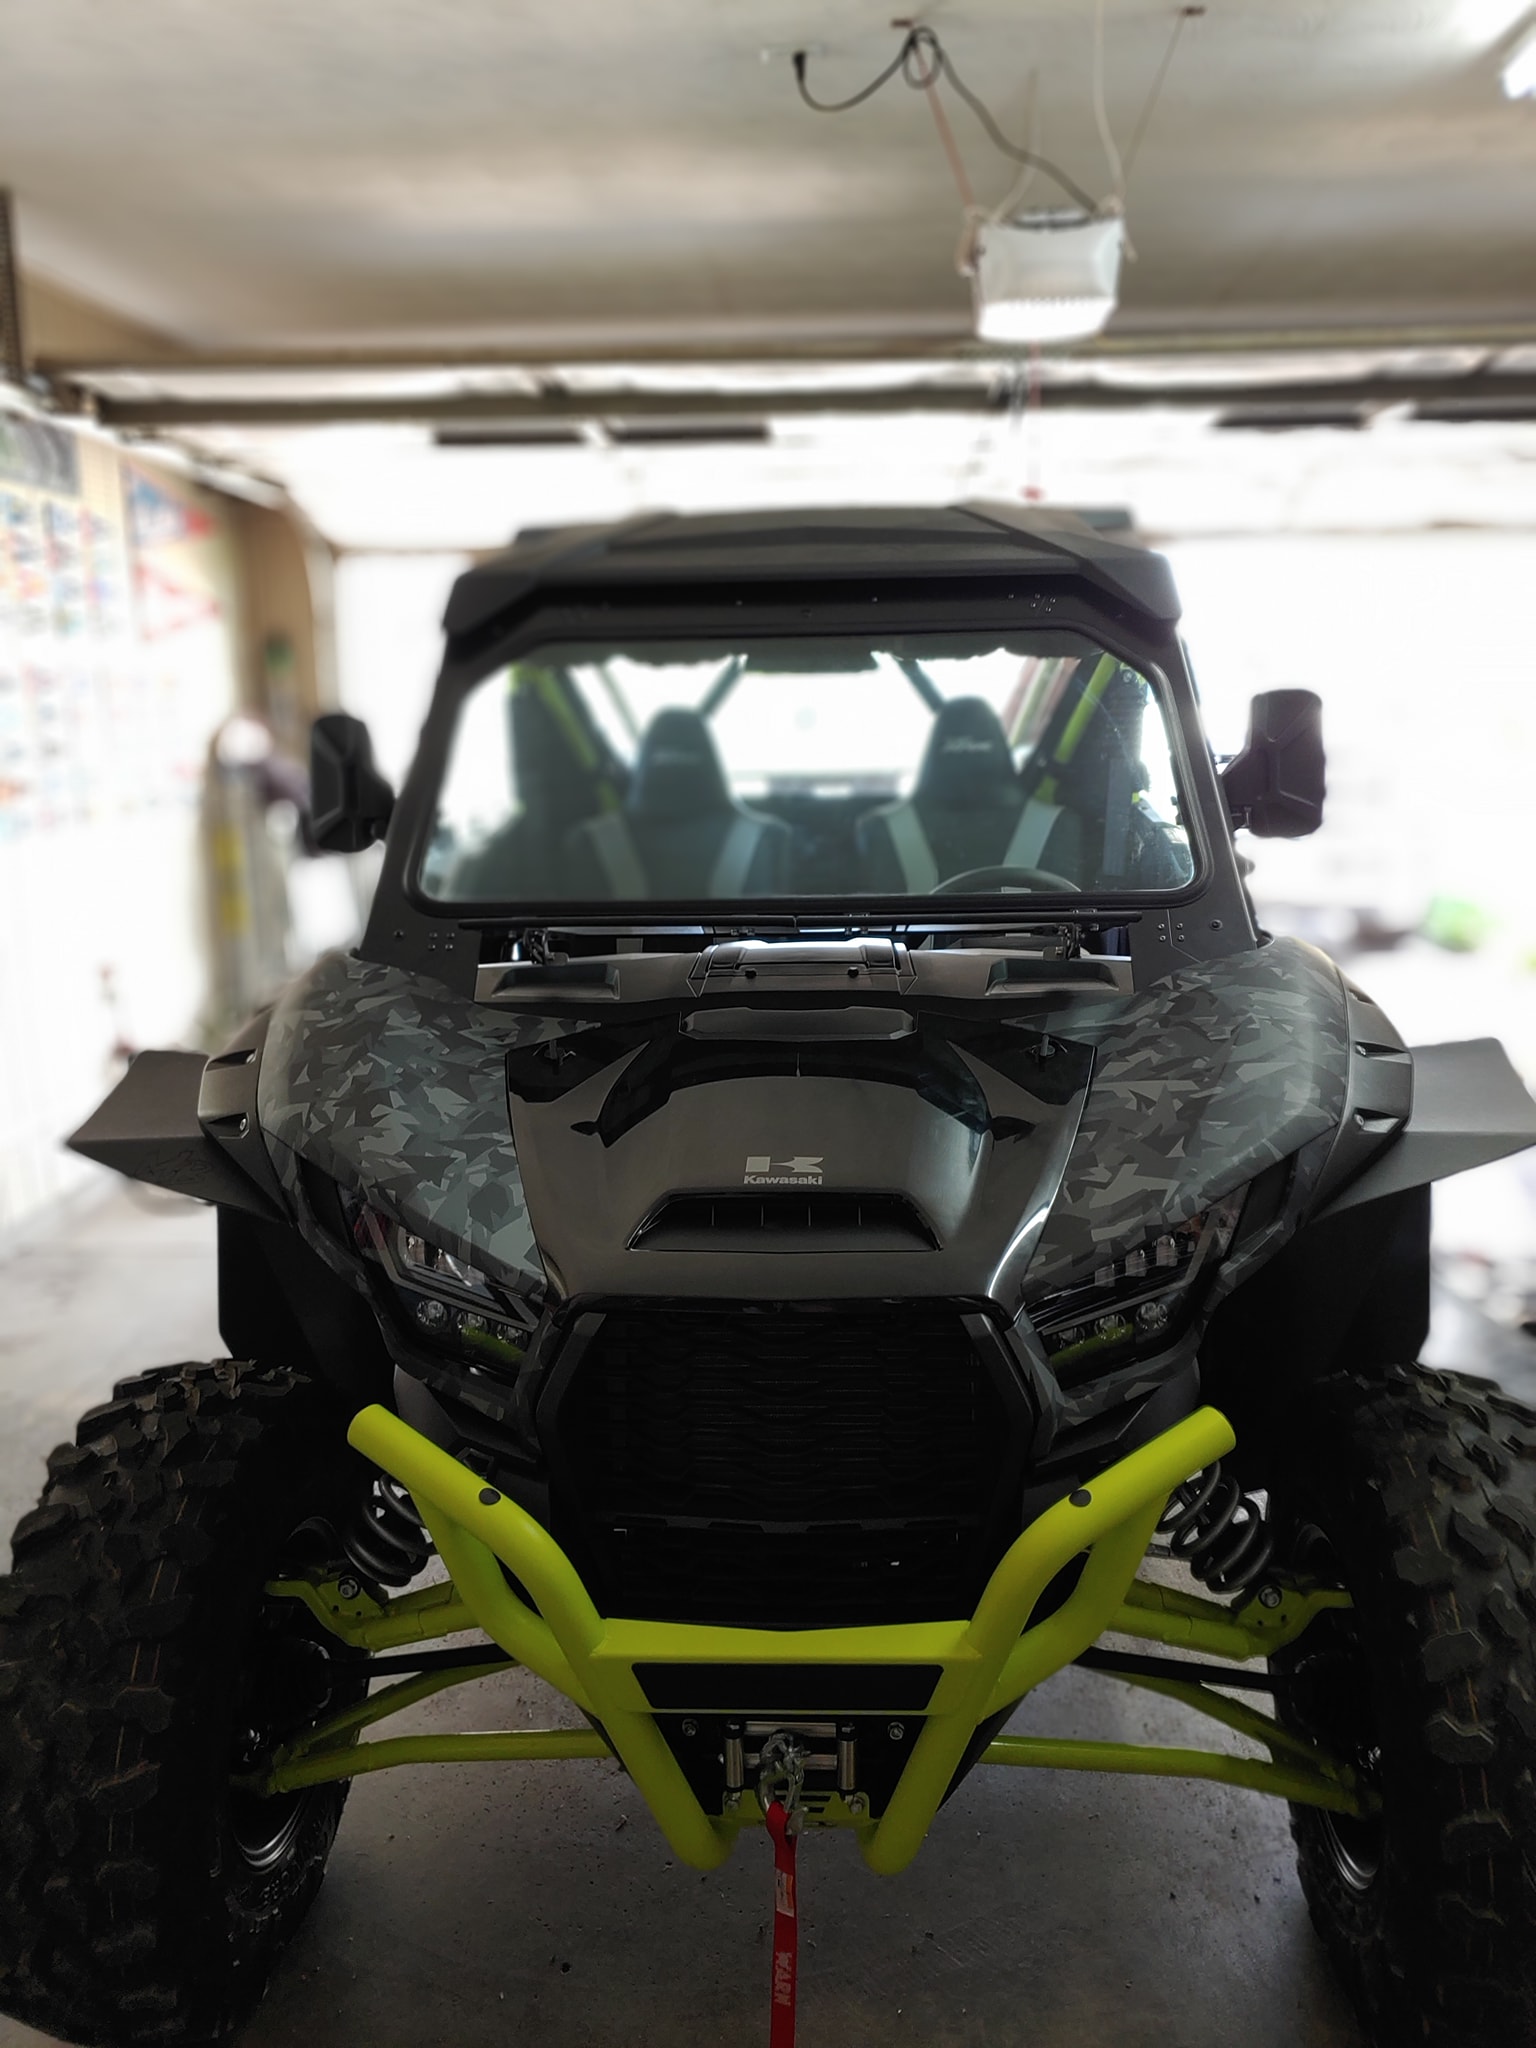 Best Side Mirrors For The Kawasaki Mule And Teryx